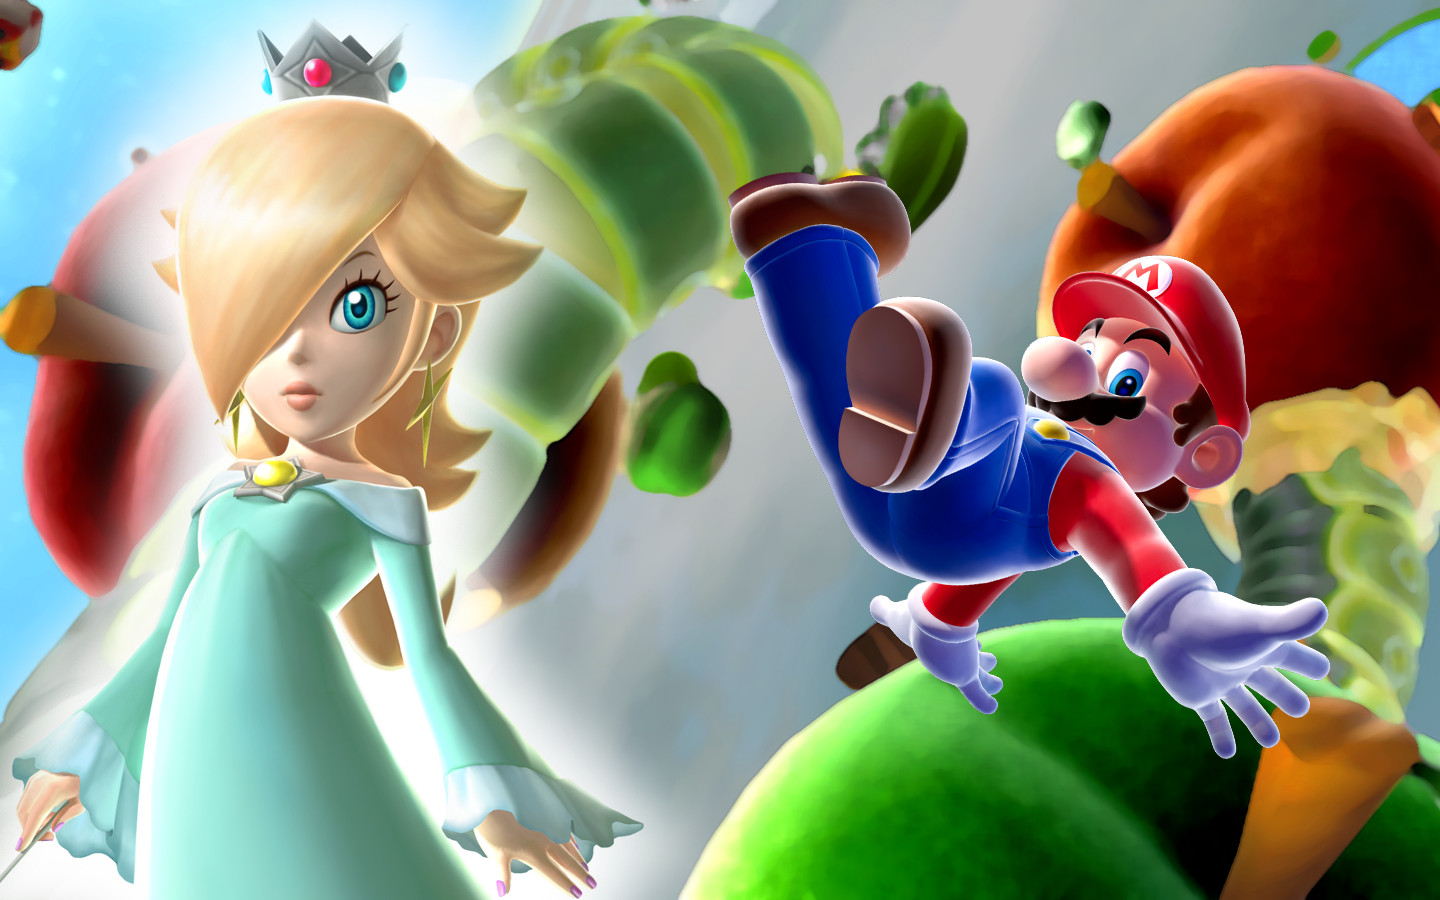 By Stephen Ments Off On Super Mario Galaxy Wallpaper HD